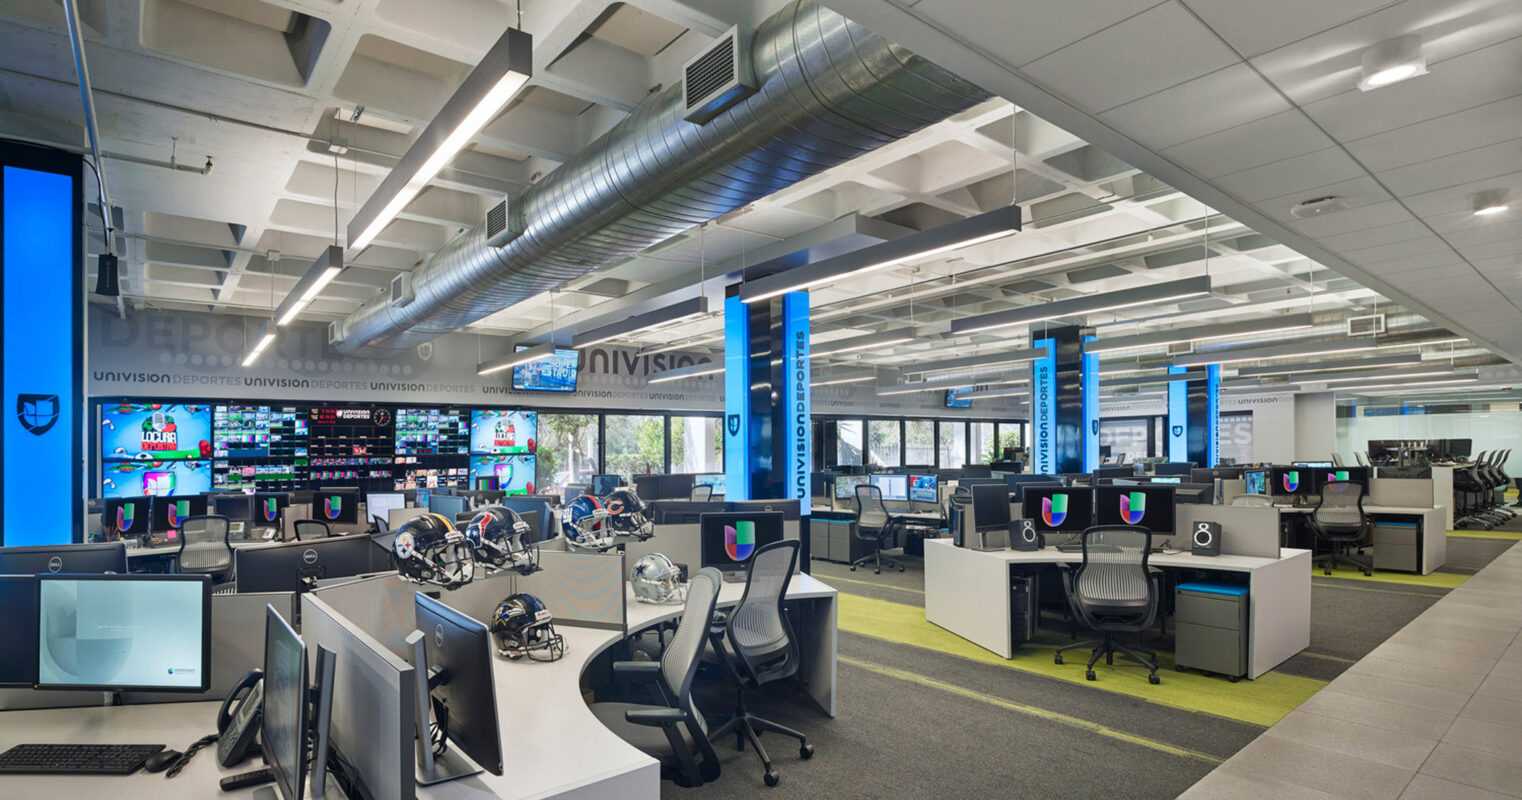 Modern office space featuring an open-floor plan with clusters of ergonomic workstations under exposed ductwork, infused with natural light from expansive windows, and accented by vibrant blue structural columns. Dynamic digital screens add a technological edge to the environment.